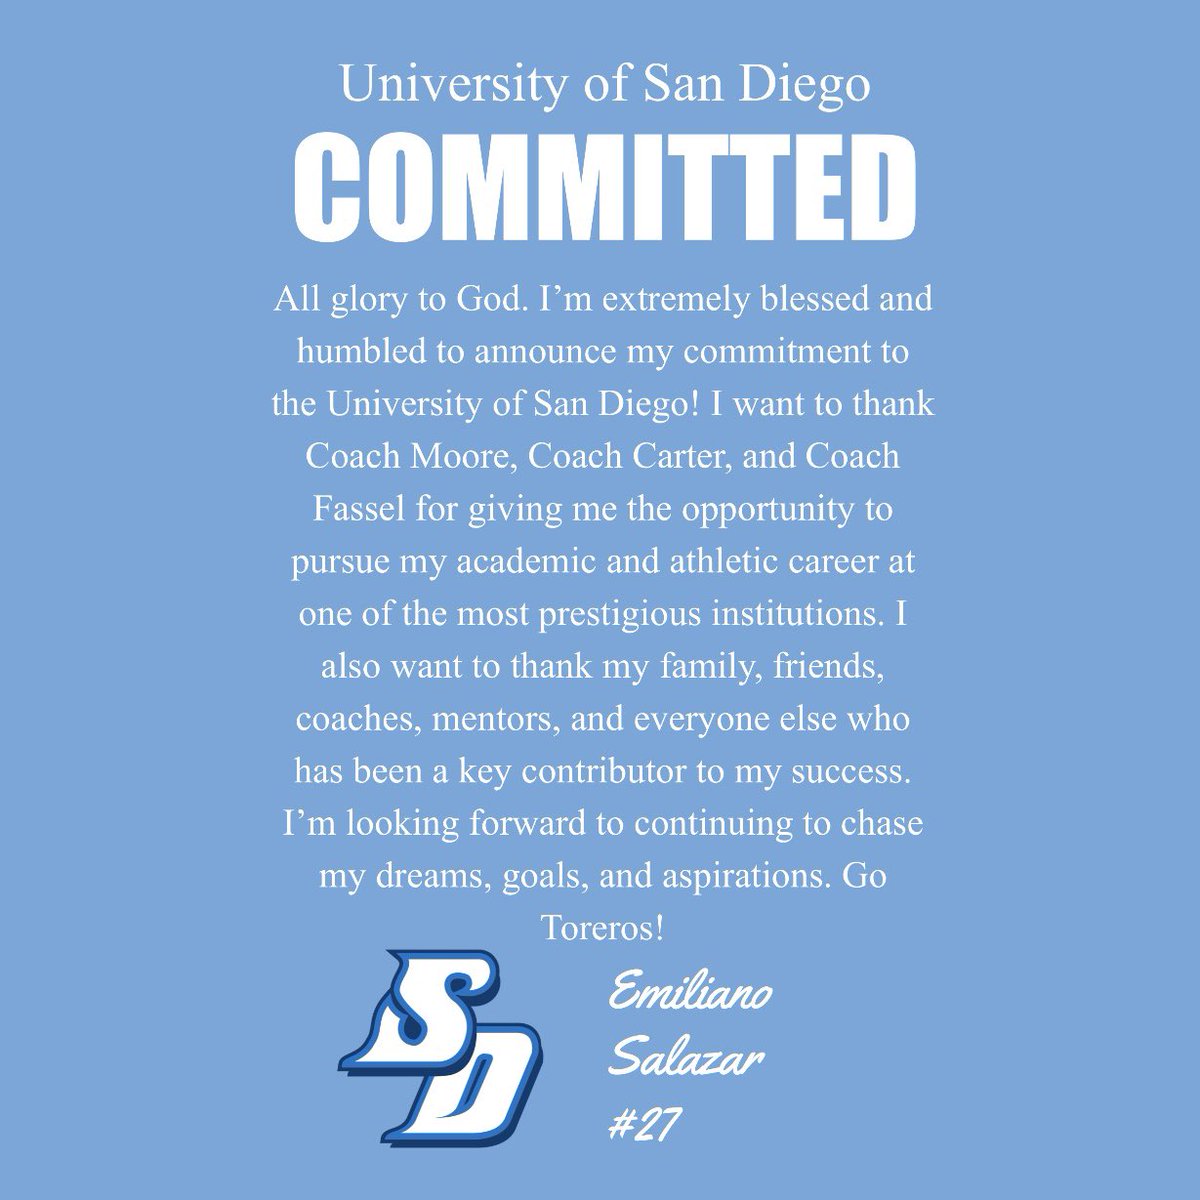 COMMITTED to the University of San Diego! #GoToreros